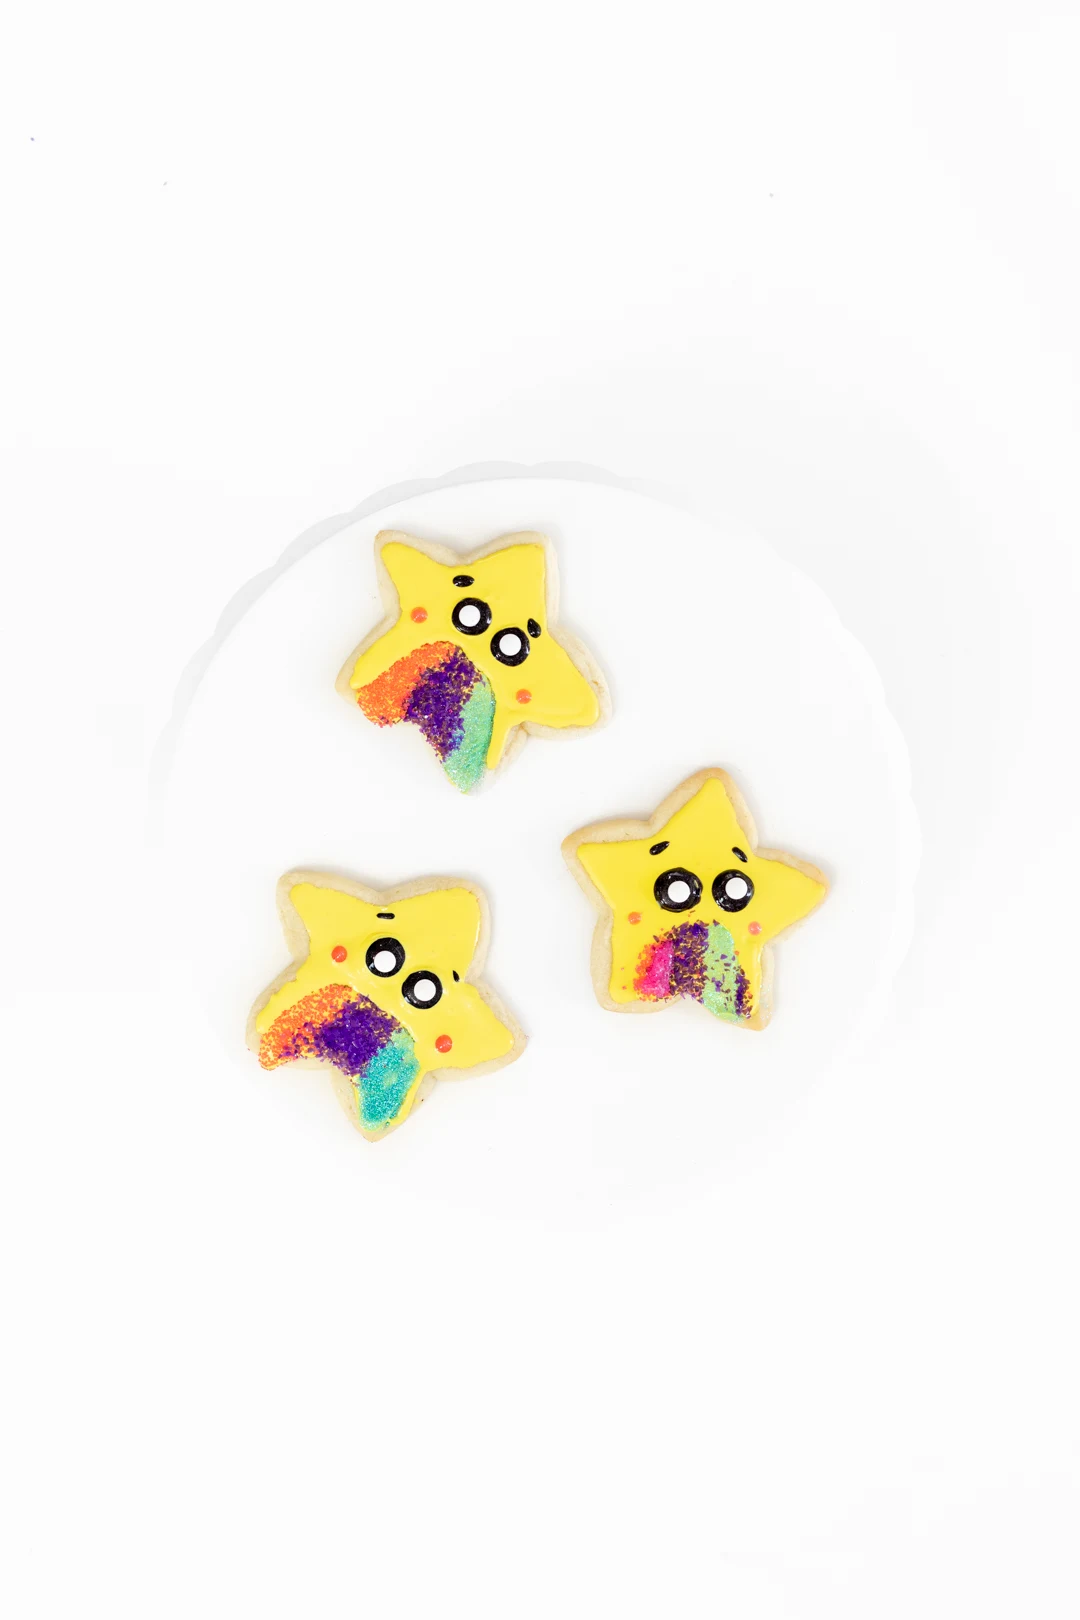 LEGO shooting star cookies inspired by The LEGO 2 Movie